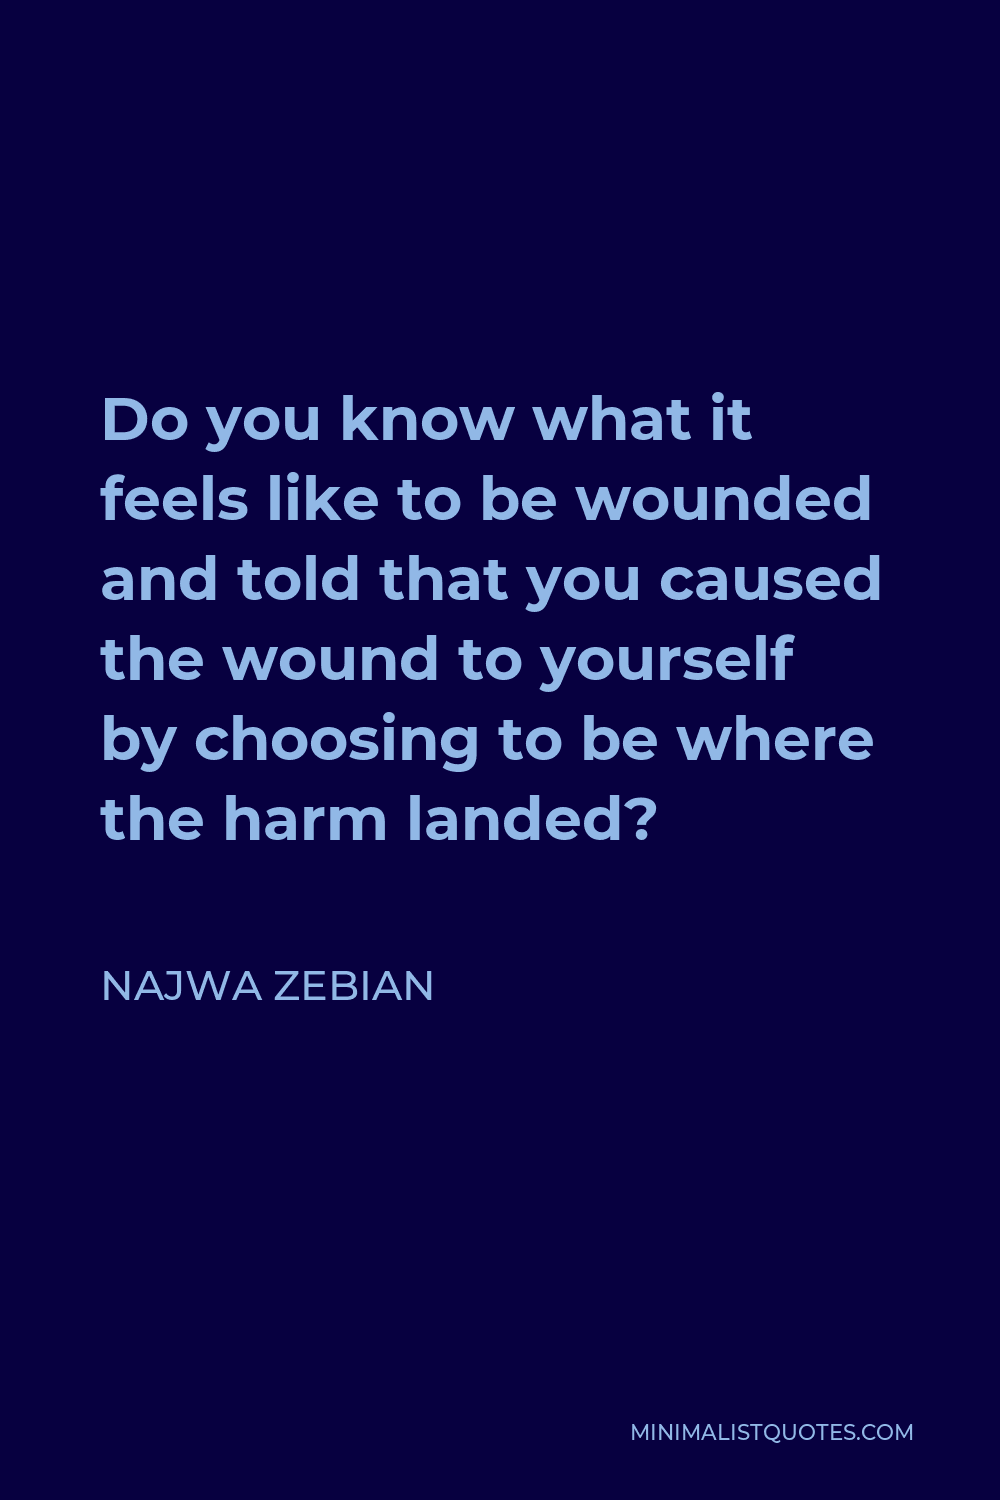 Najwa Zebian Quote - Do you know what it feels like to be wounded and told that you caused the wound to yourself by choosing to be where the harm landed?